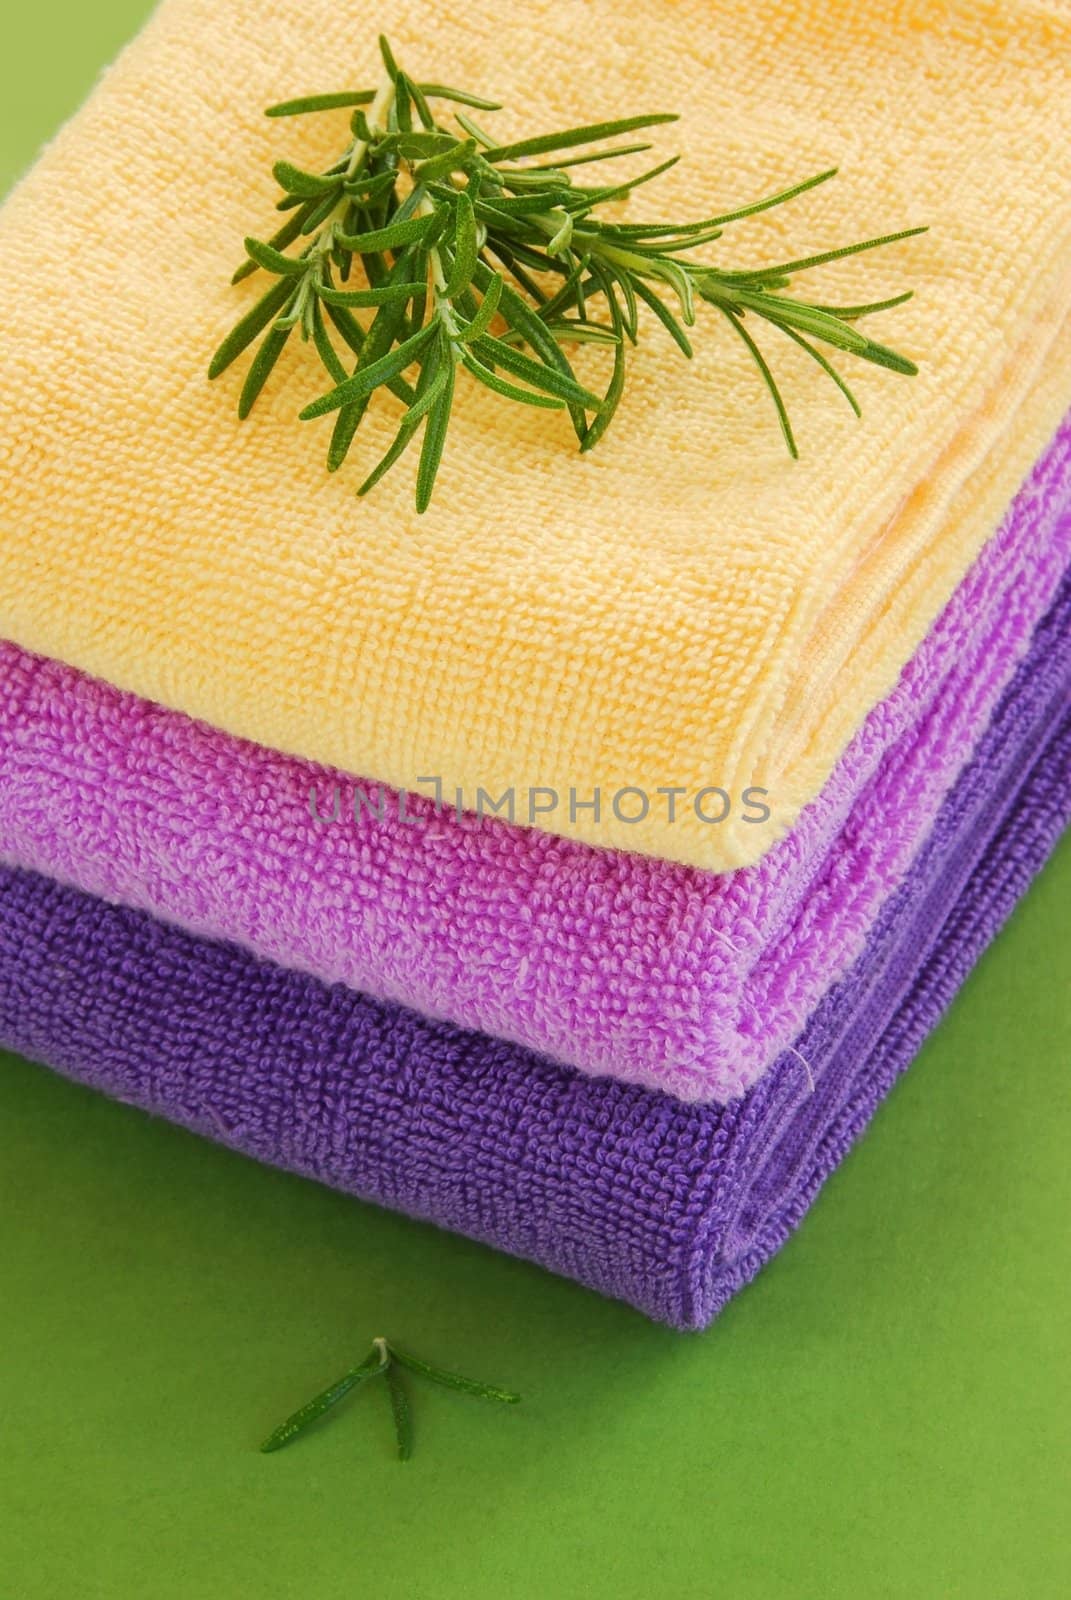 pile of colorful towels with rosemary sprig over green background